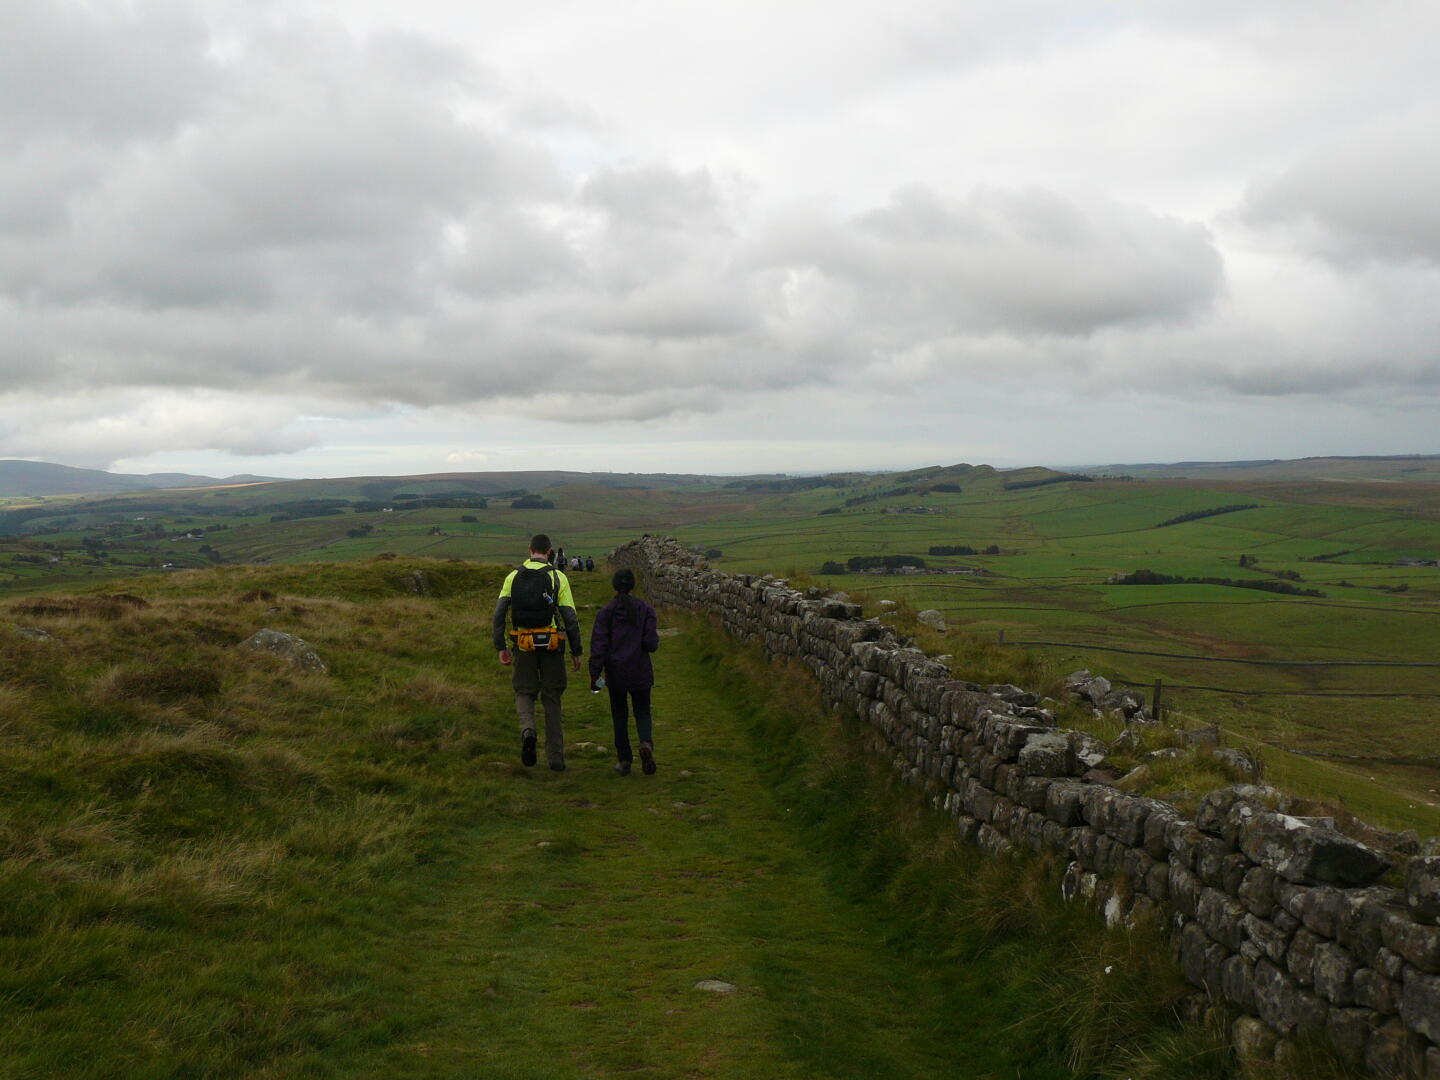 Two weeks later: walking the Hadrian&rsquo;s wall.